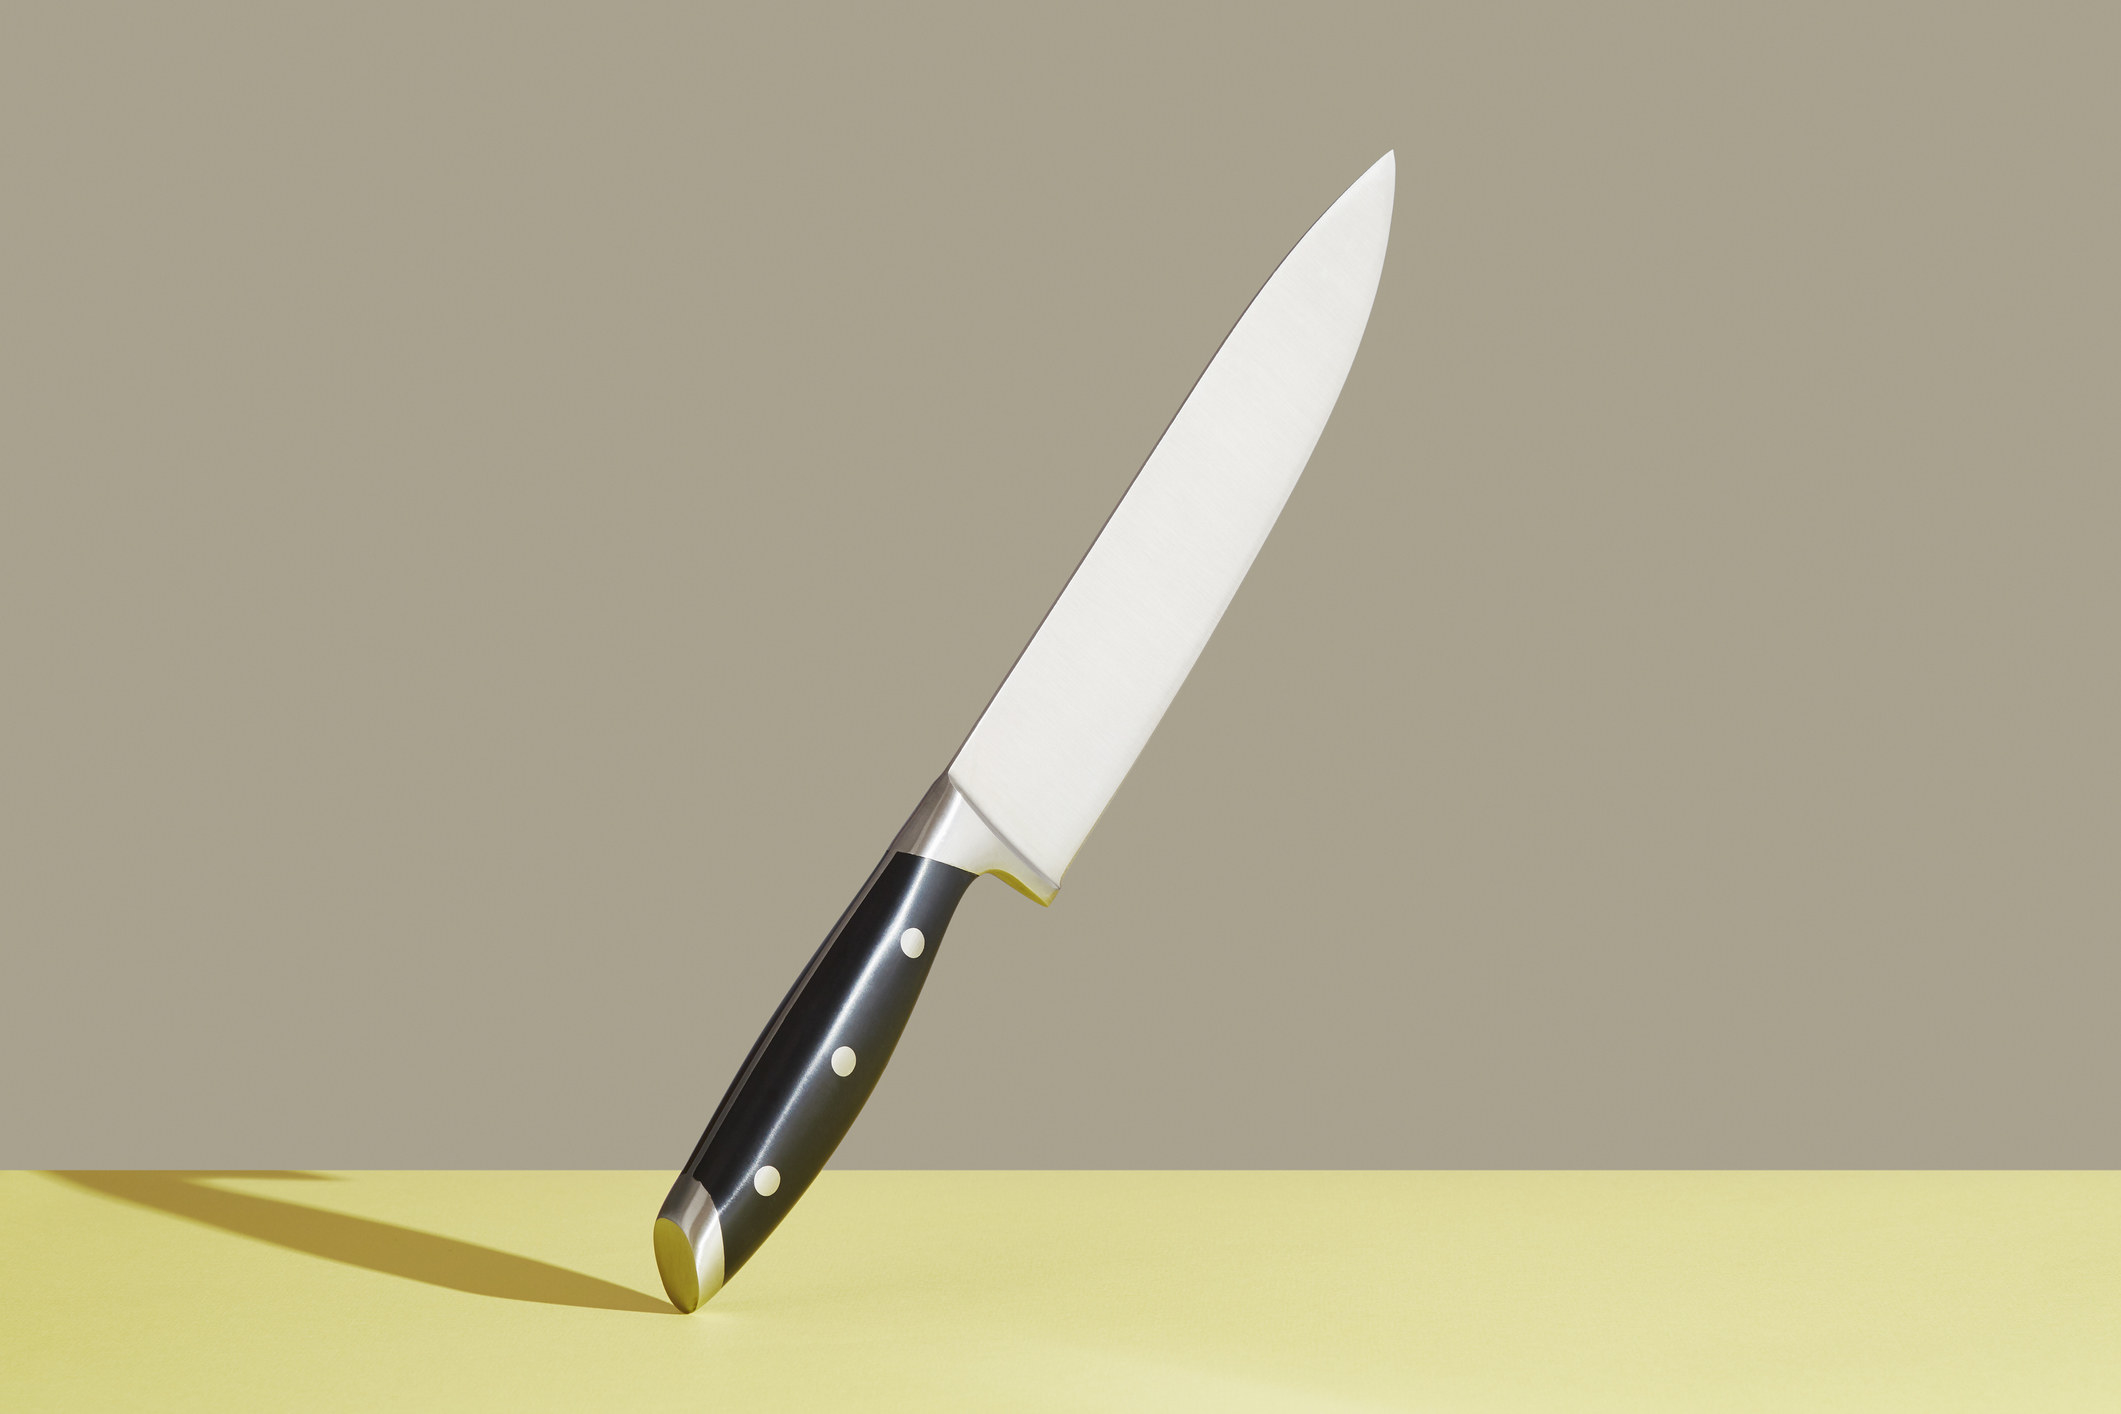 A knife resting on its handle.